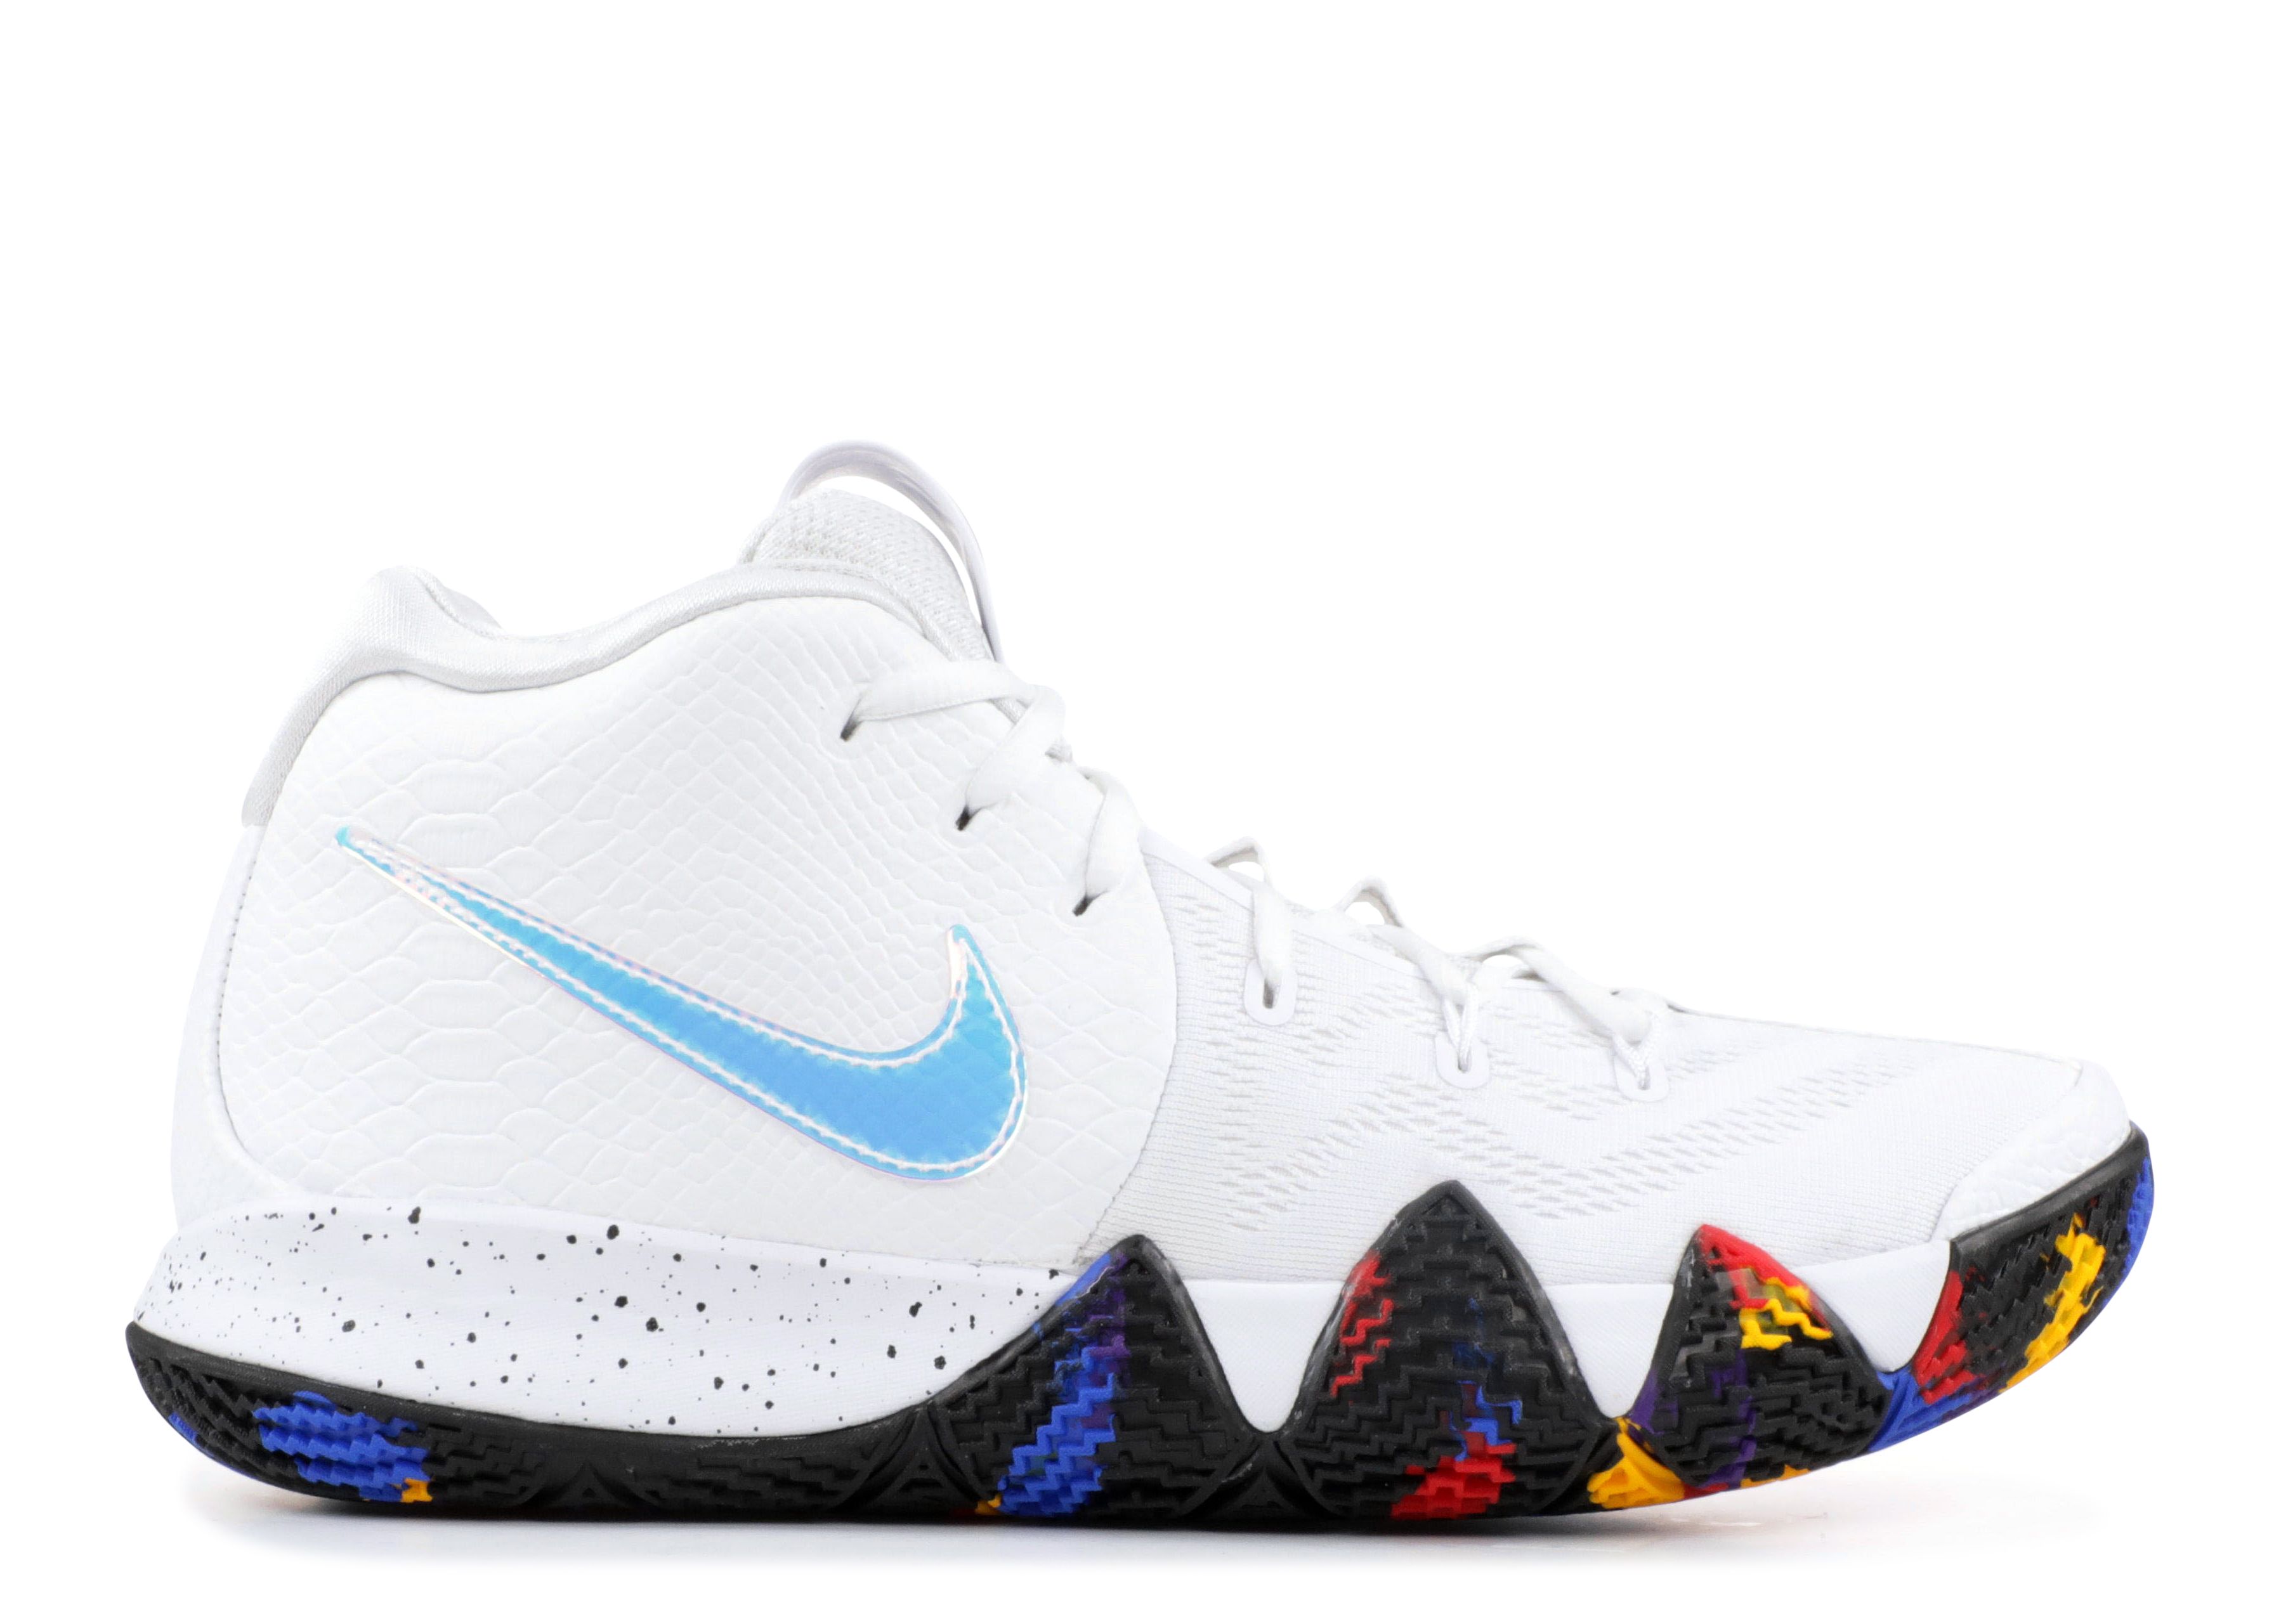 nike kyrie 4 ncaa march madness